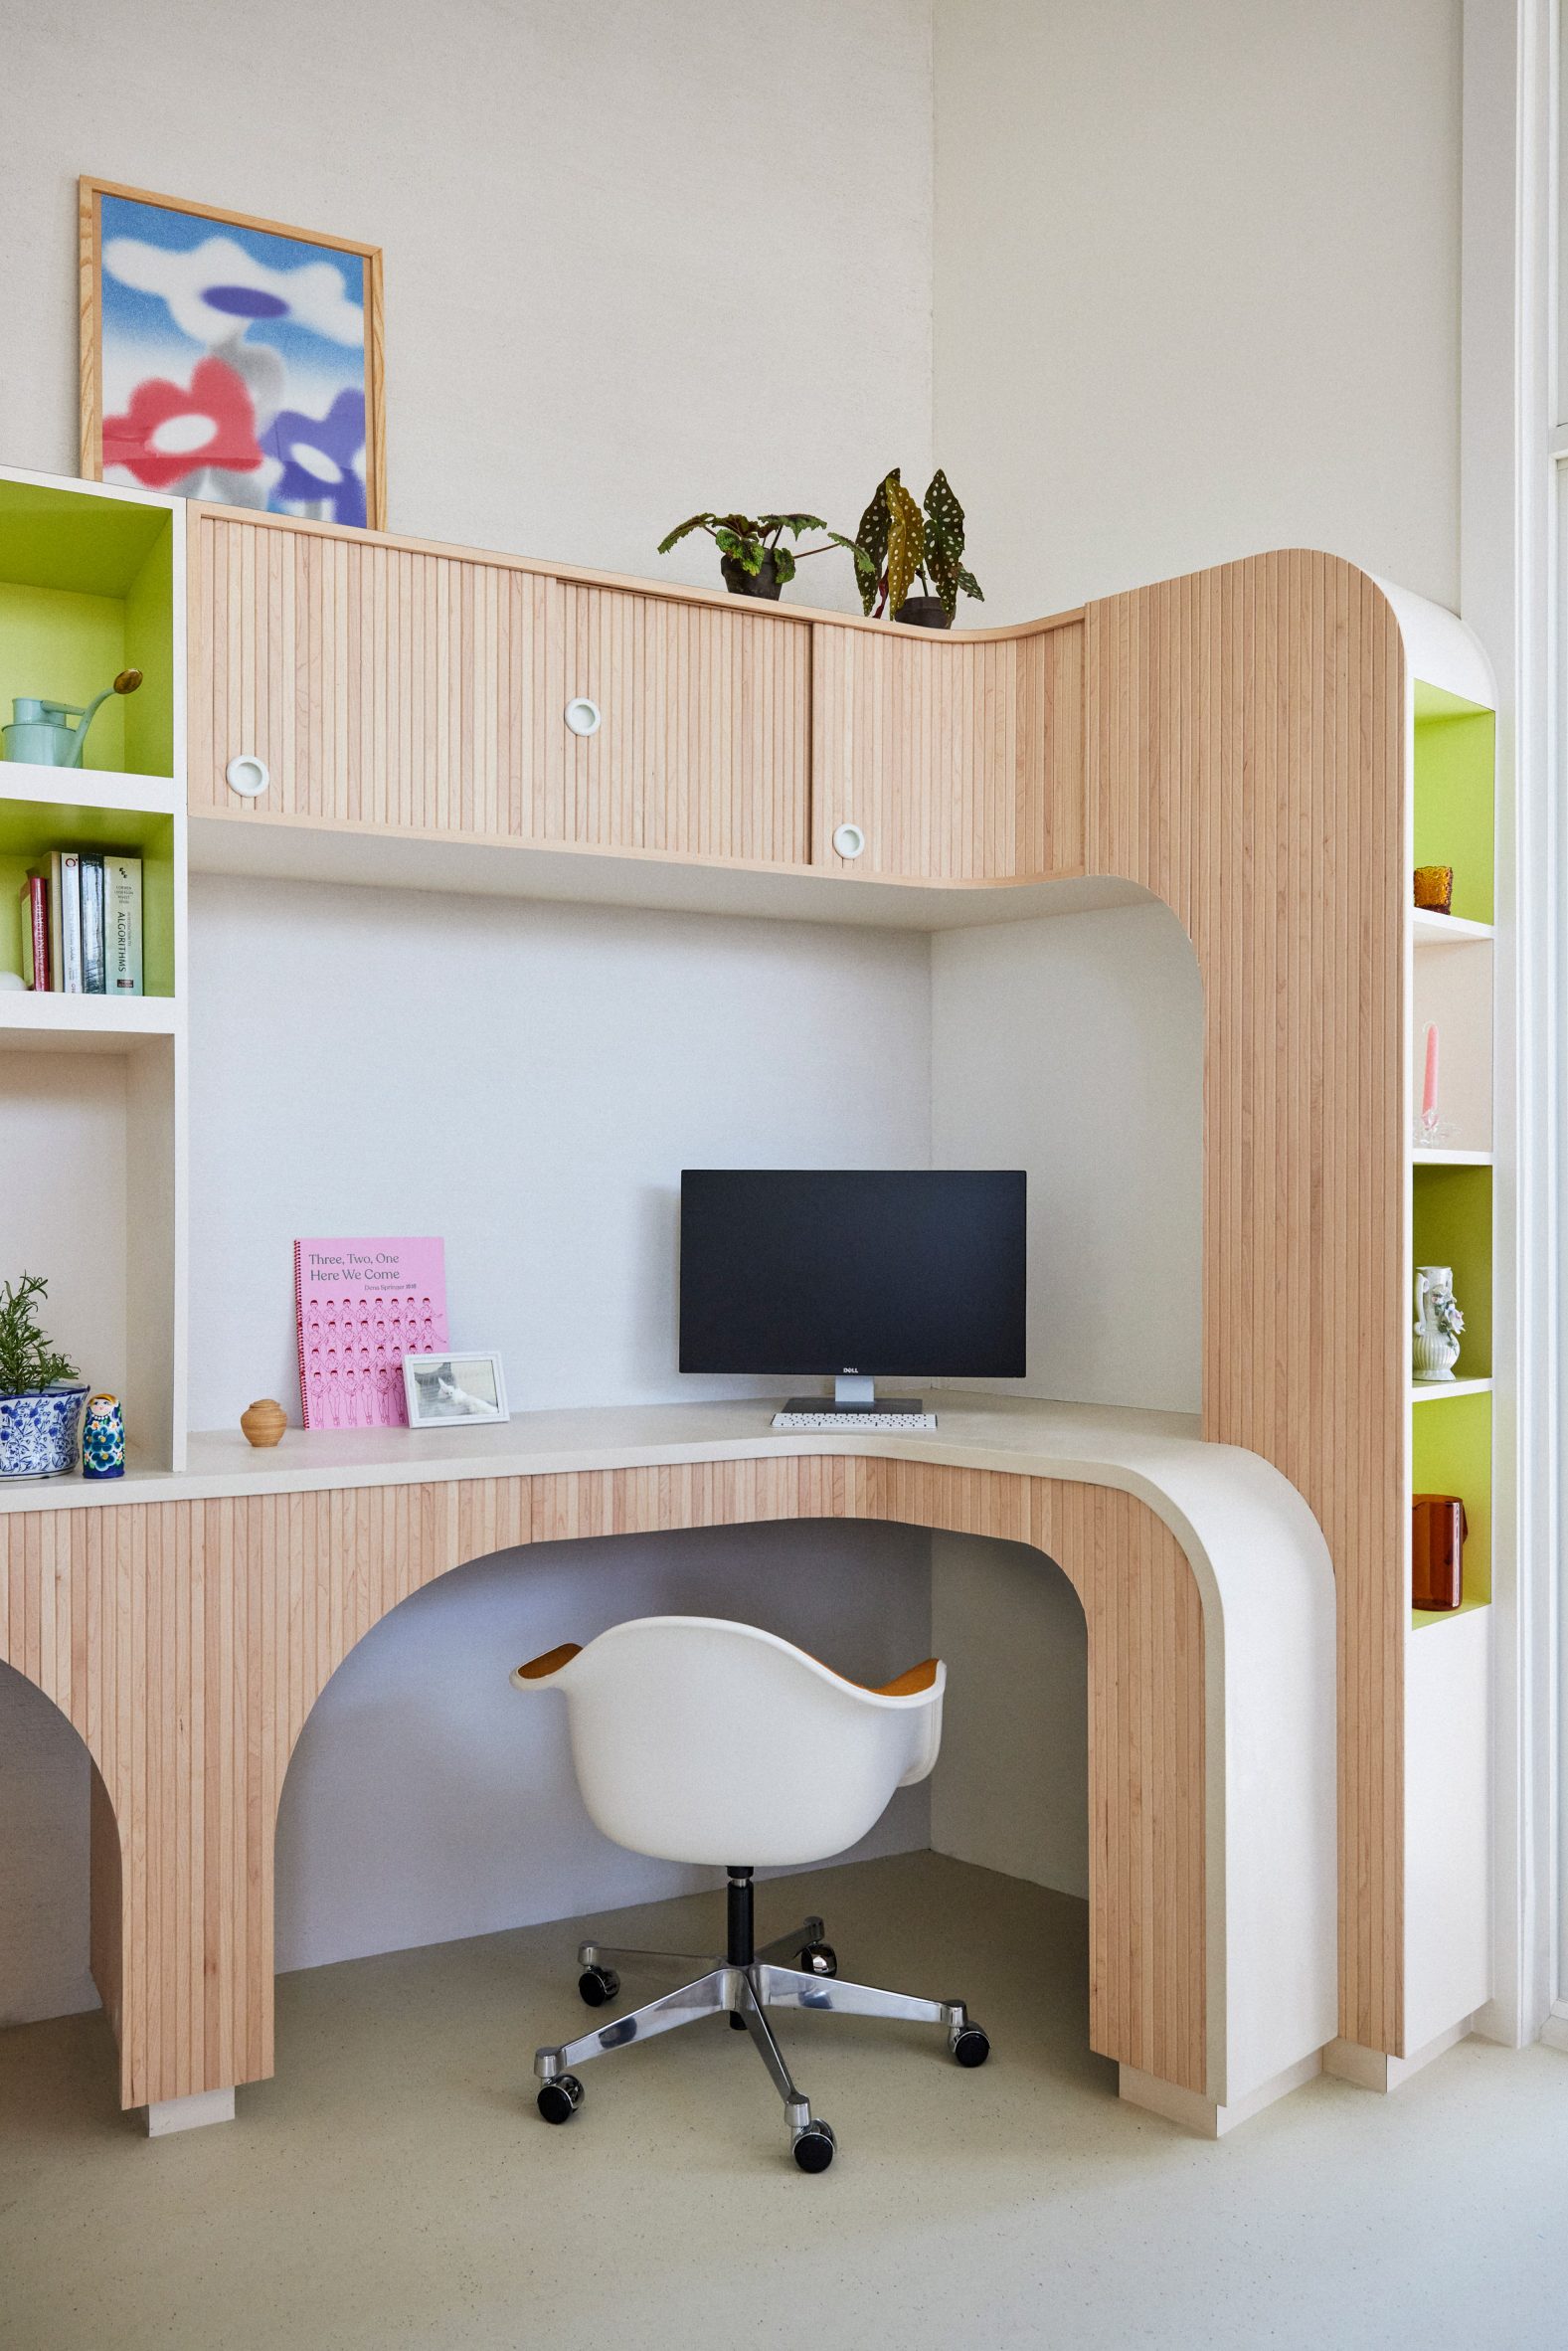 A work-from-home area where pale wood panels are contrasted by lime-green storage niches